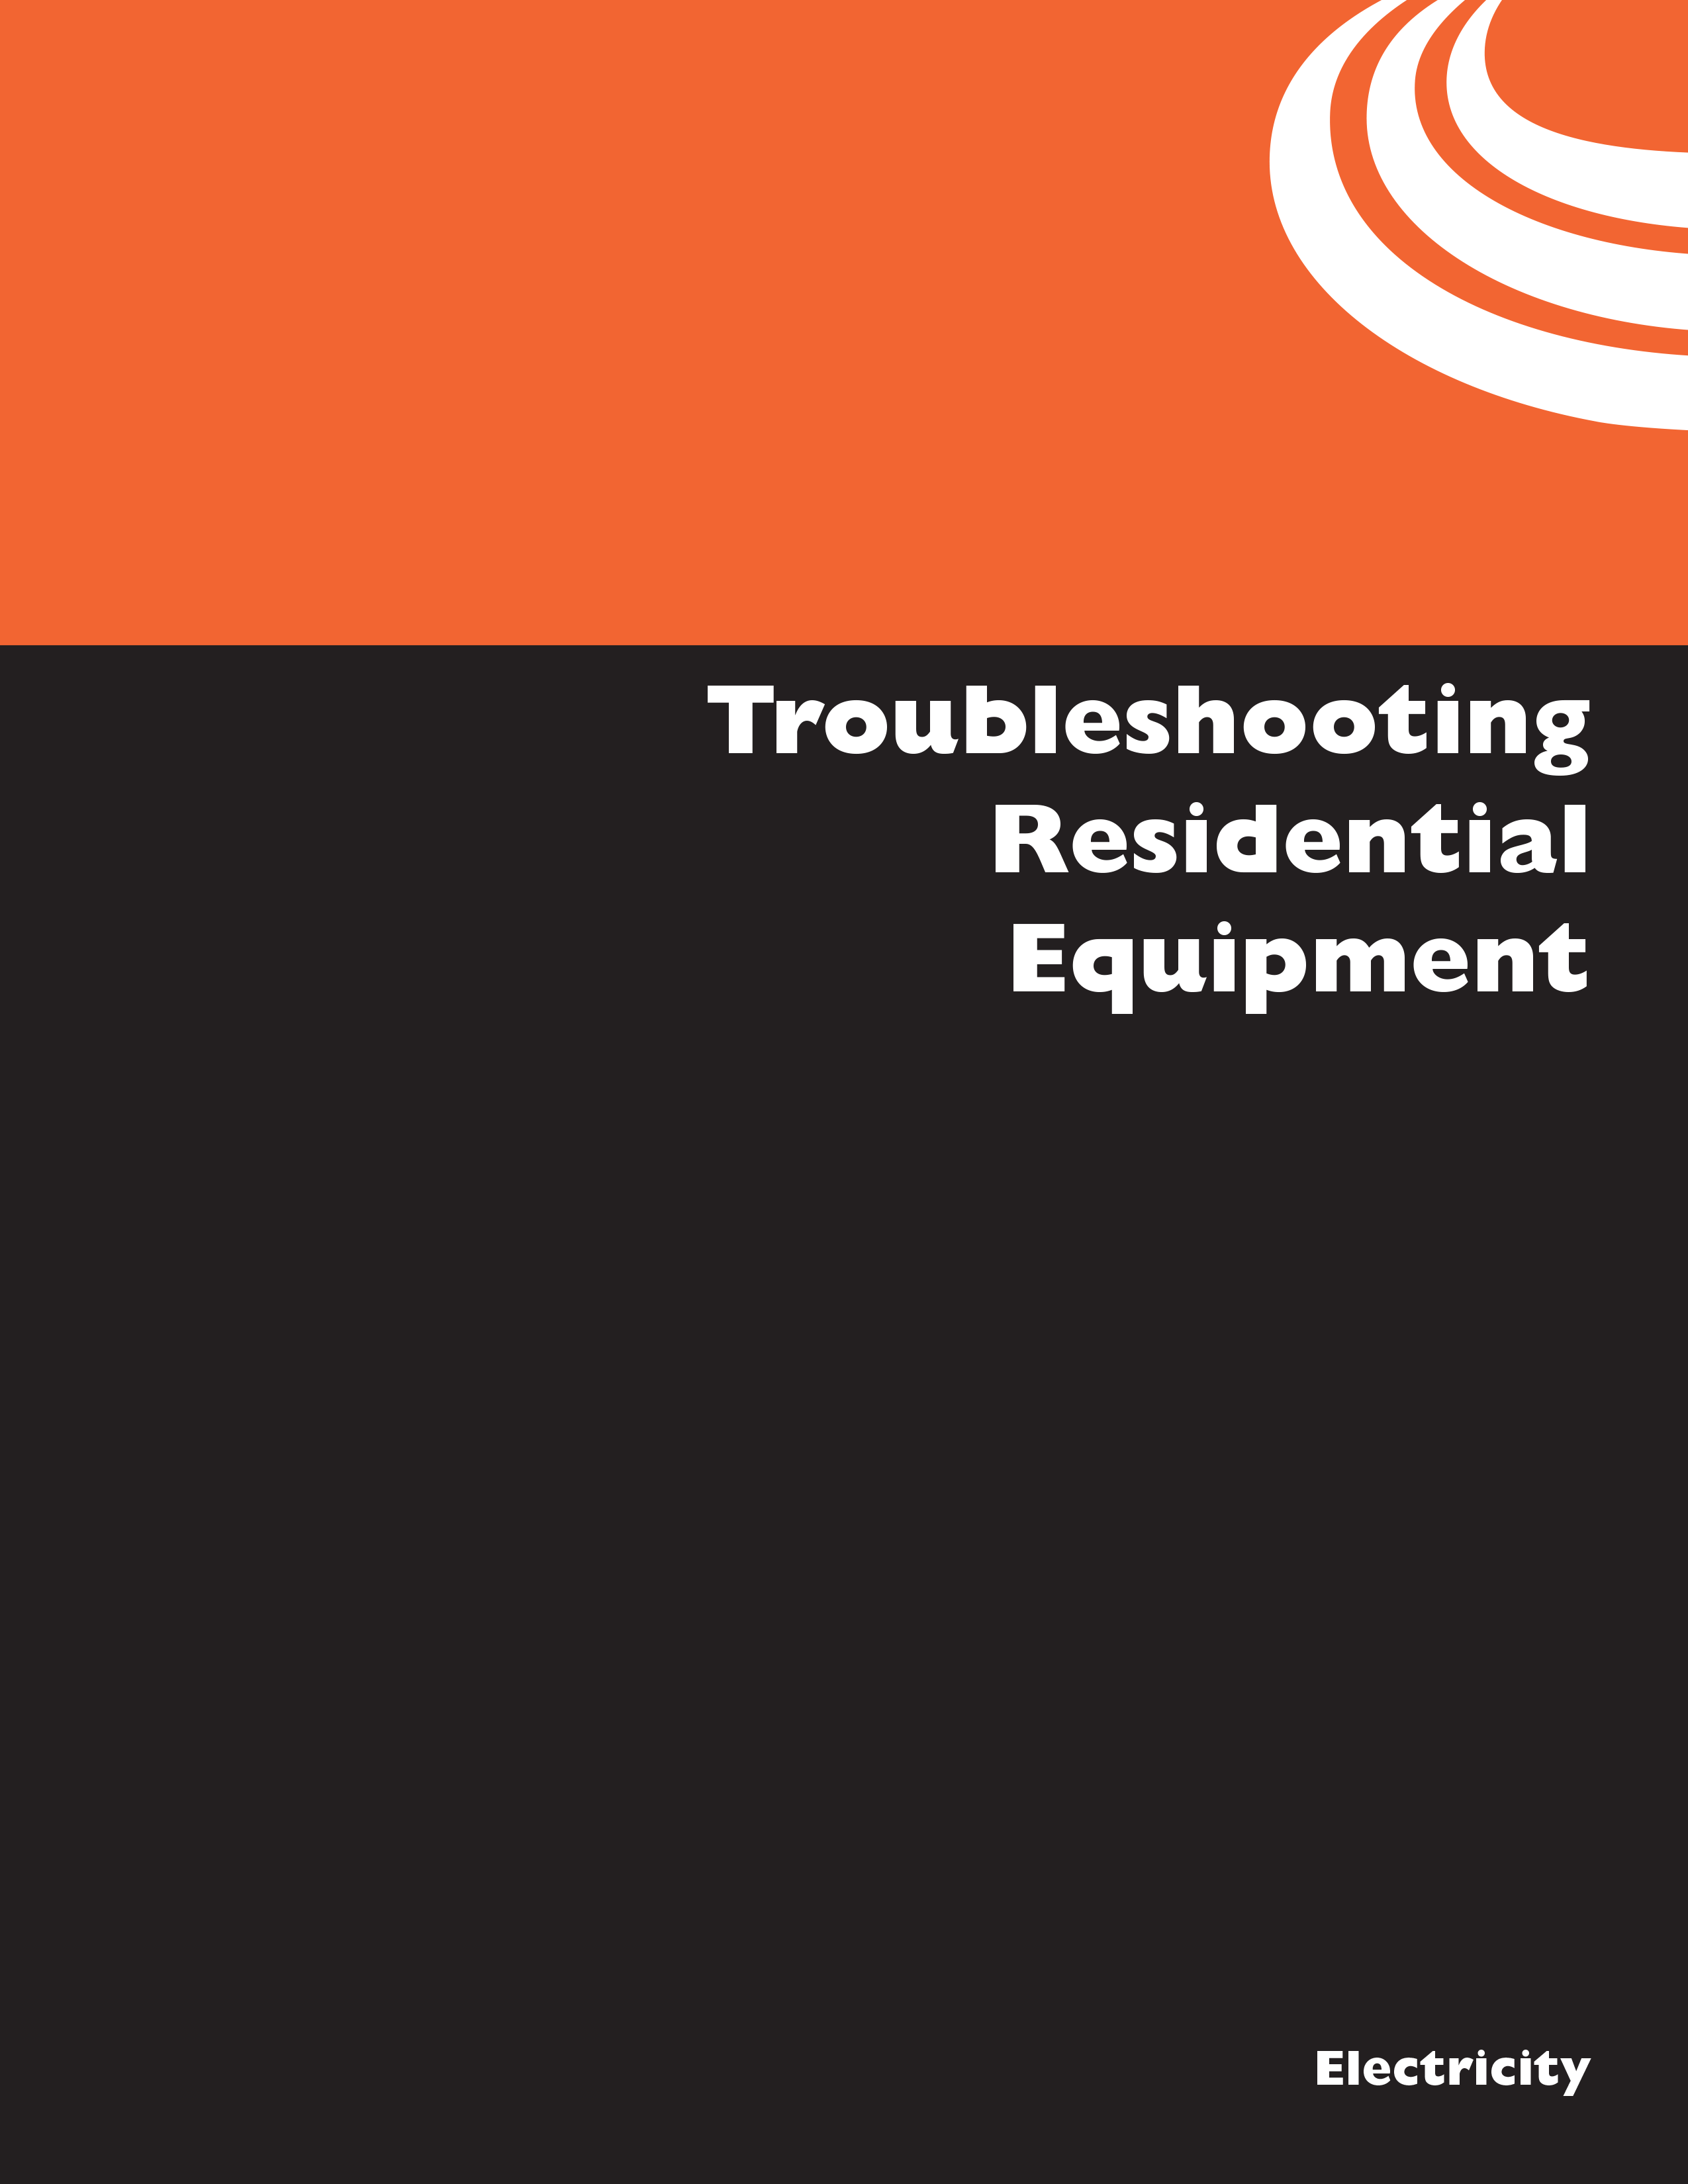 Troubleshooting Residential Equipment